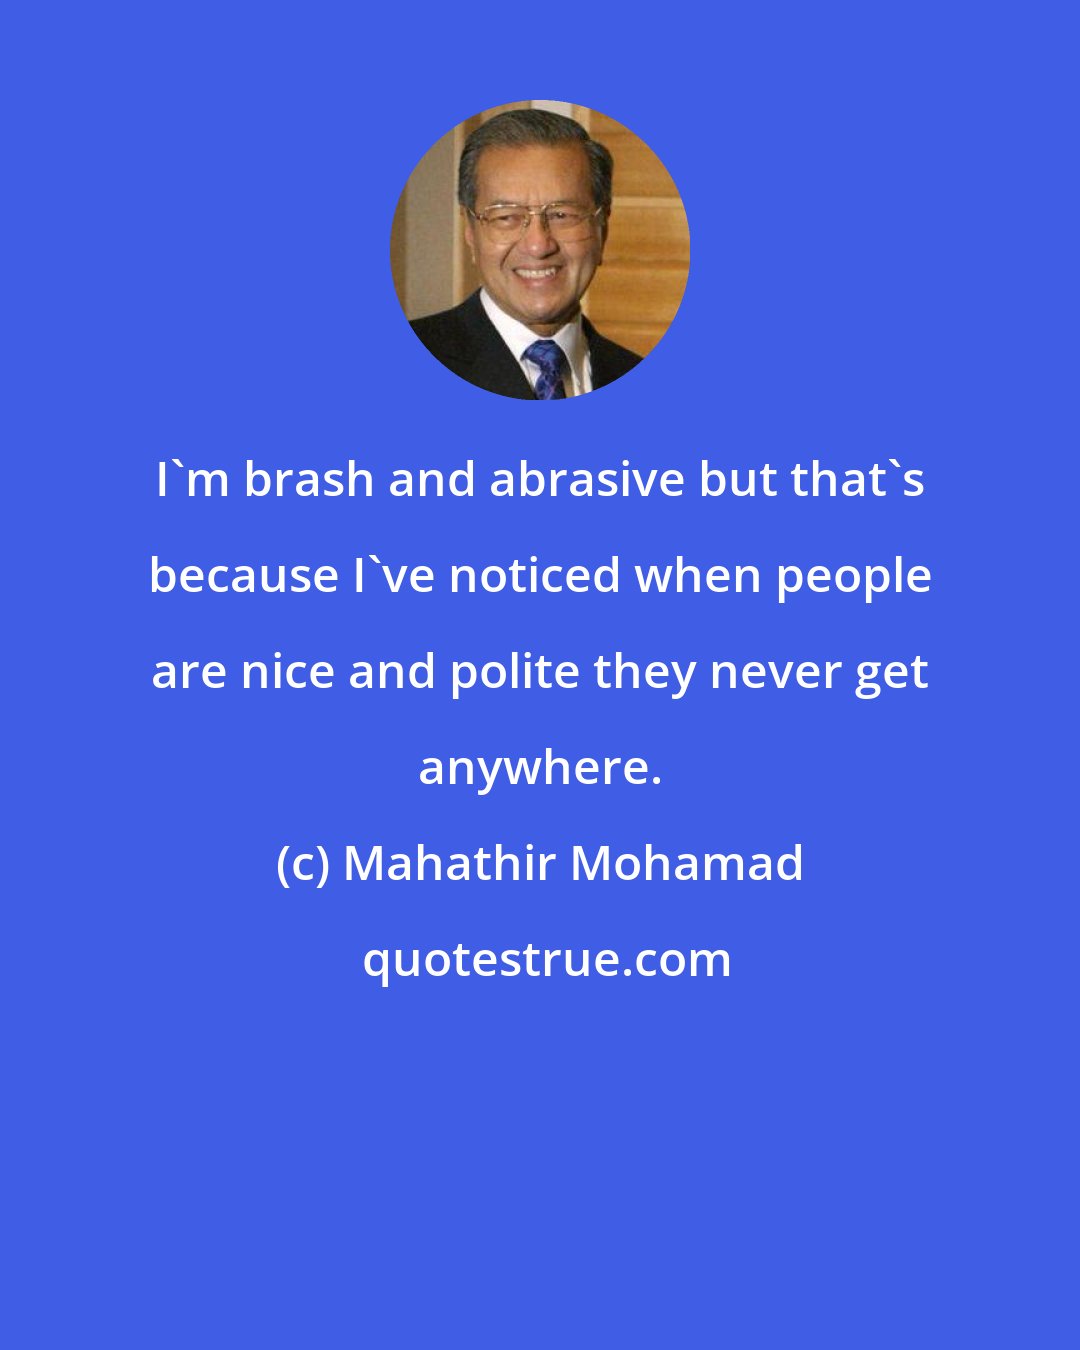 Mahathir Mohamad: I'm brash and abrasive but that's because I've noticed when people are nice and polite they never get anywhere.